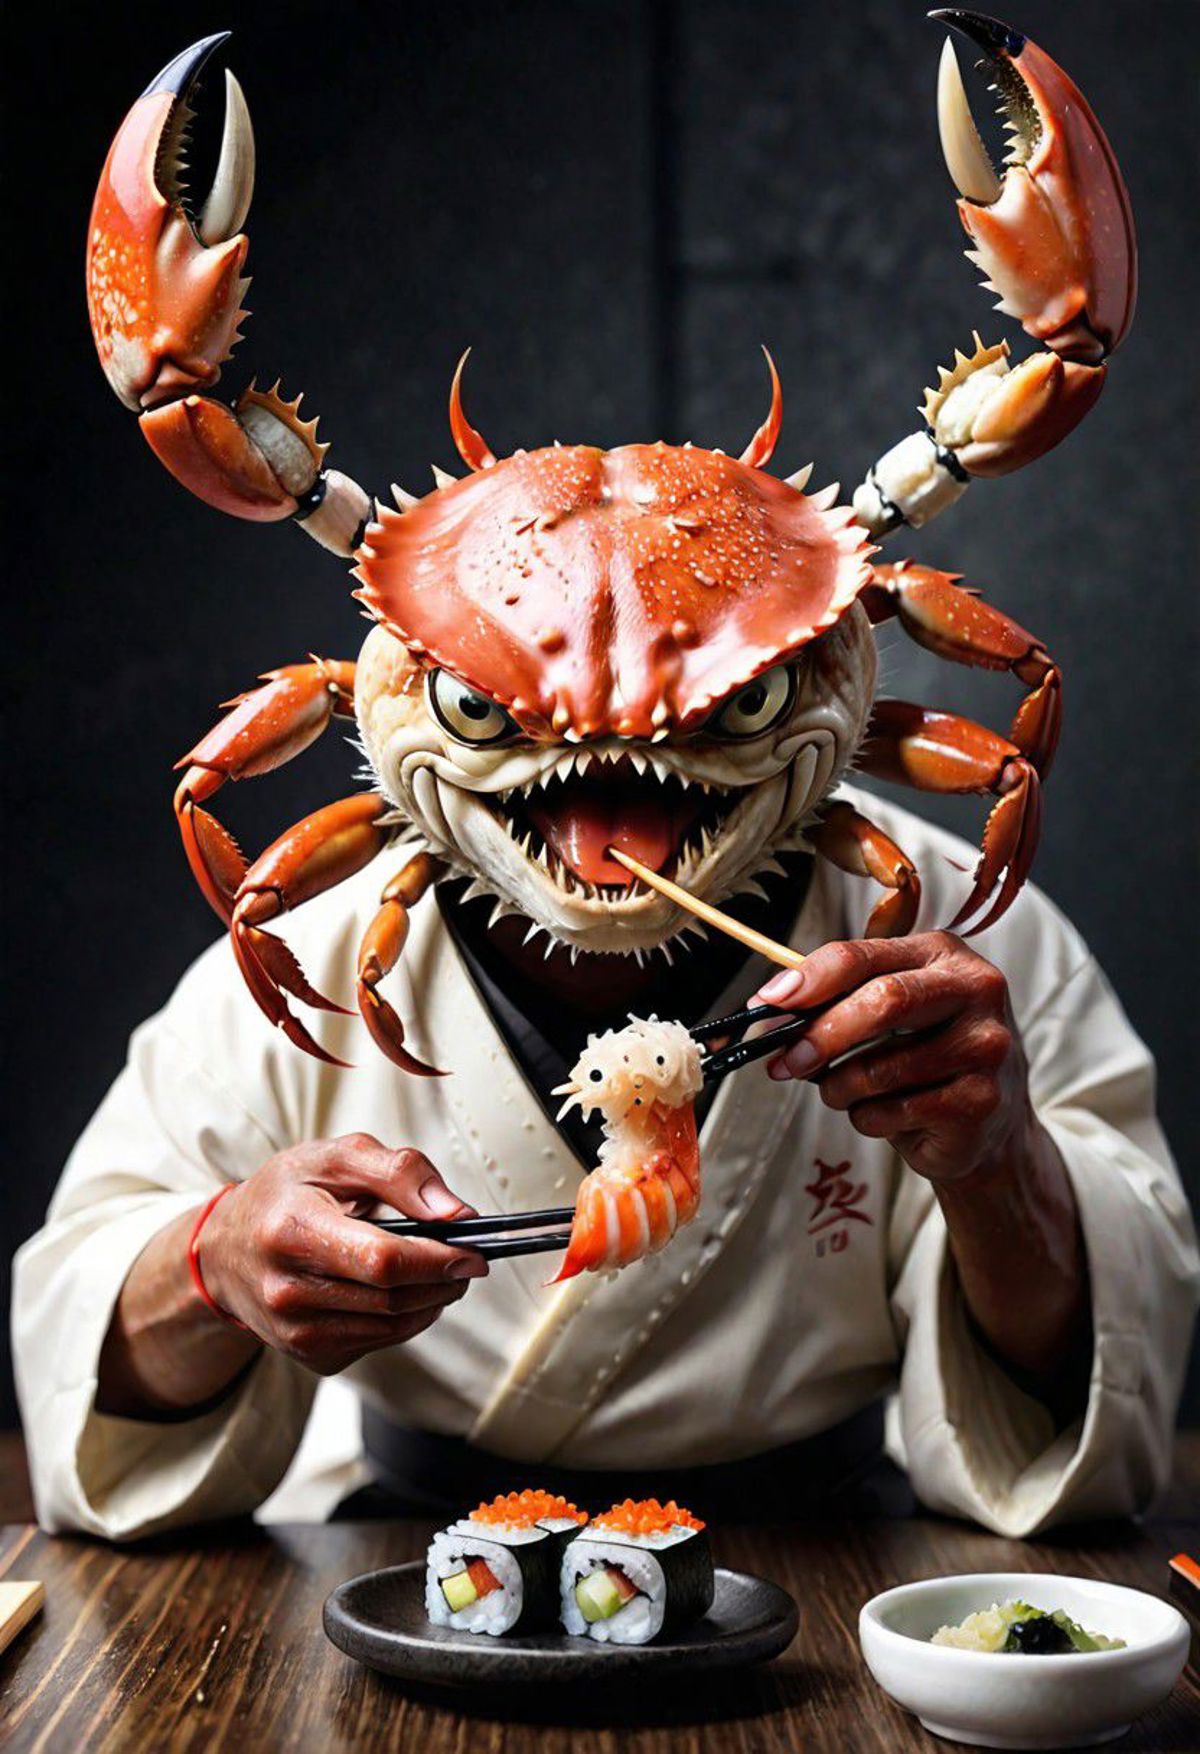 A person wearing a crab mask eating food with chopsticks.